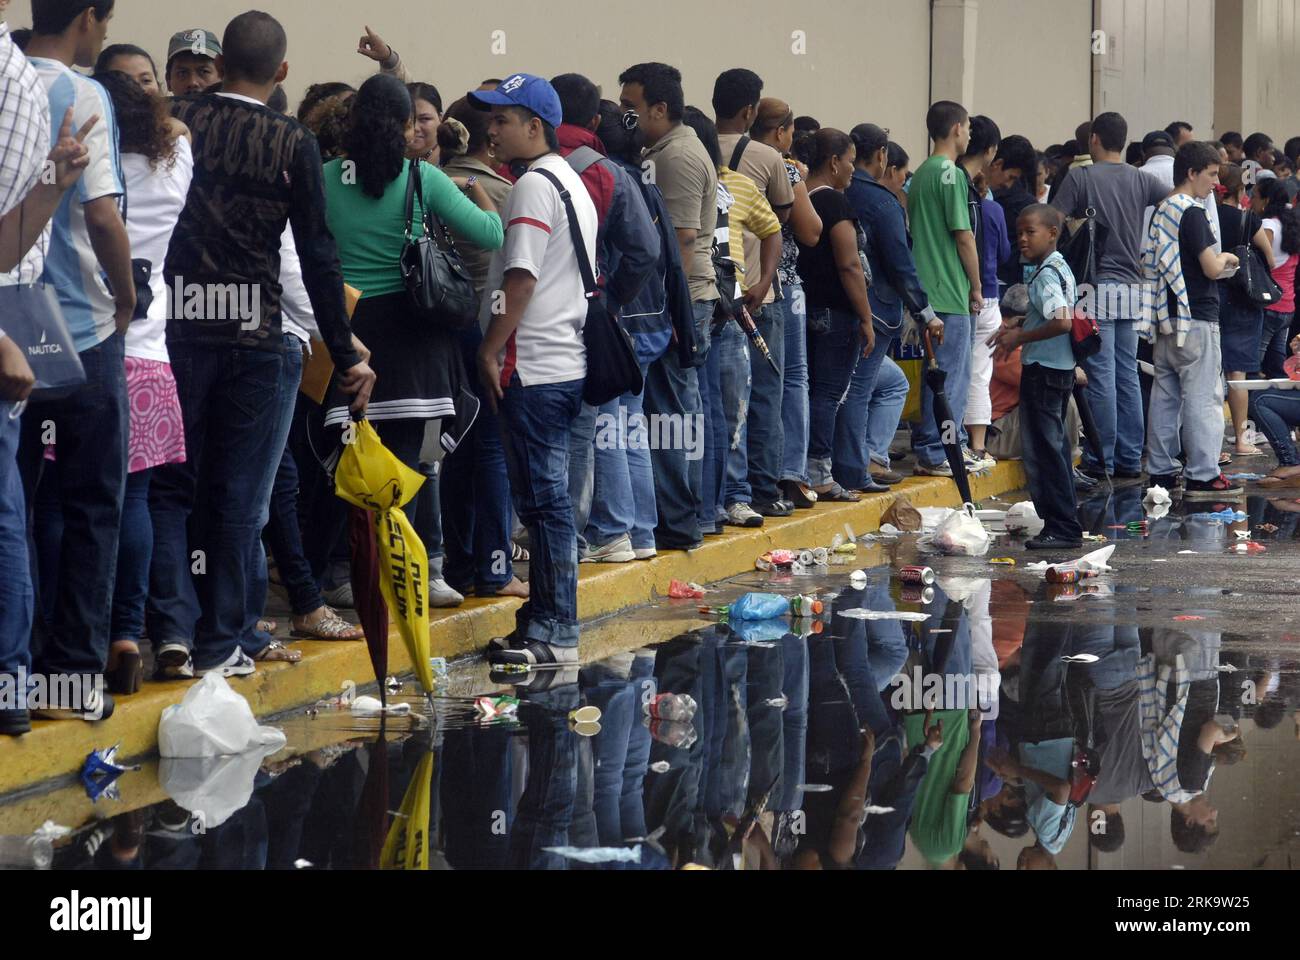 Bildnummer: 54233742  Datum: 17.07.2010  Copyright: imago/Xinhua (100717) -- PANAMA CITY, July 17, 2010 (Xinhua) -- Illegal immigrants wait to get legal ID at the Atlapa exhibition and convention center in Panama City, July 17, 2010. About 20,000 undocumented foreigners living in Panama will be granted legal right to stay, an official of National Service of Migration (SNM) said on Thursday. (Xinhua) (zx) (1)PANAMA-ILLEGAL IMMIGRANTS-LEGAL ID PUBLICATIONxNOTxINxCHN Gesellschaft Immigranten Einwanderung Panama premiumd xint kbdig xsp 2010 quer  o00 Warteschlange    Bildnummer 54233742 Date 17 07 Stock Photo